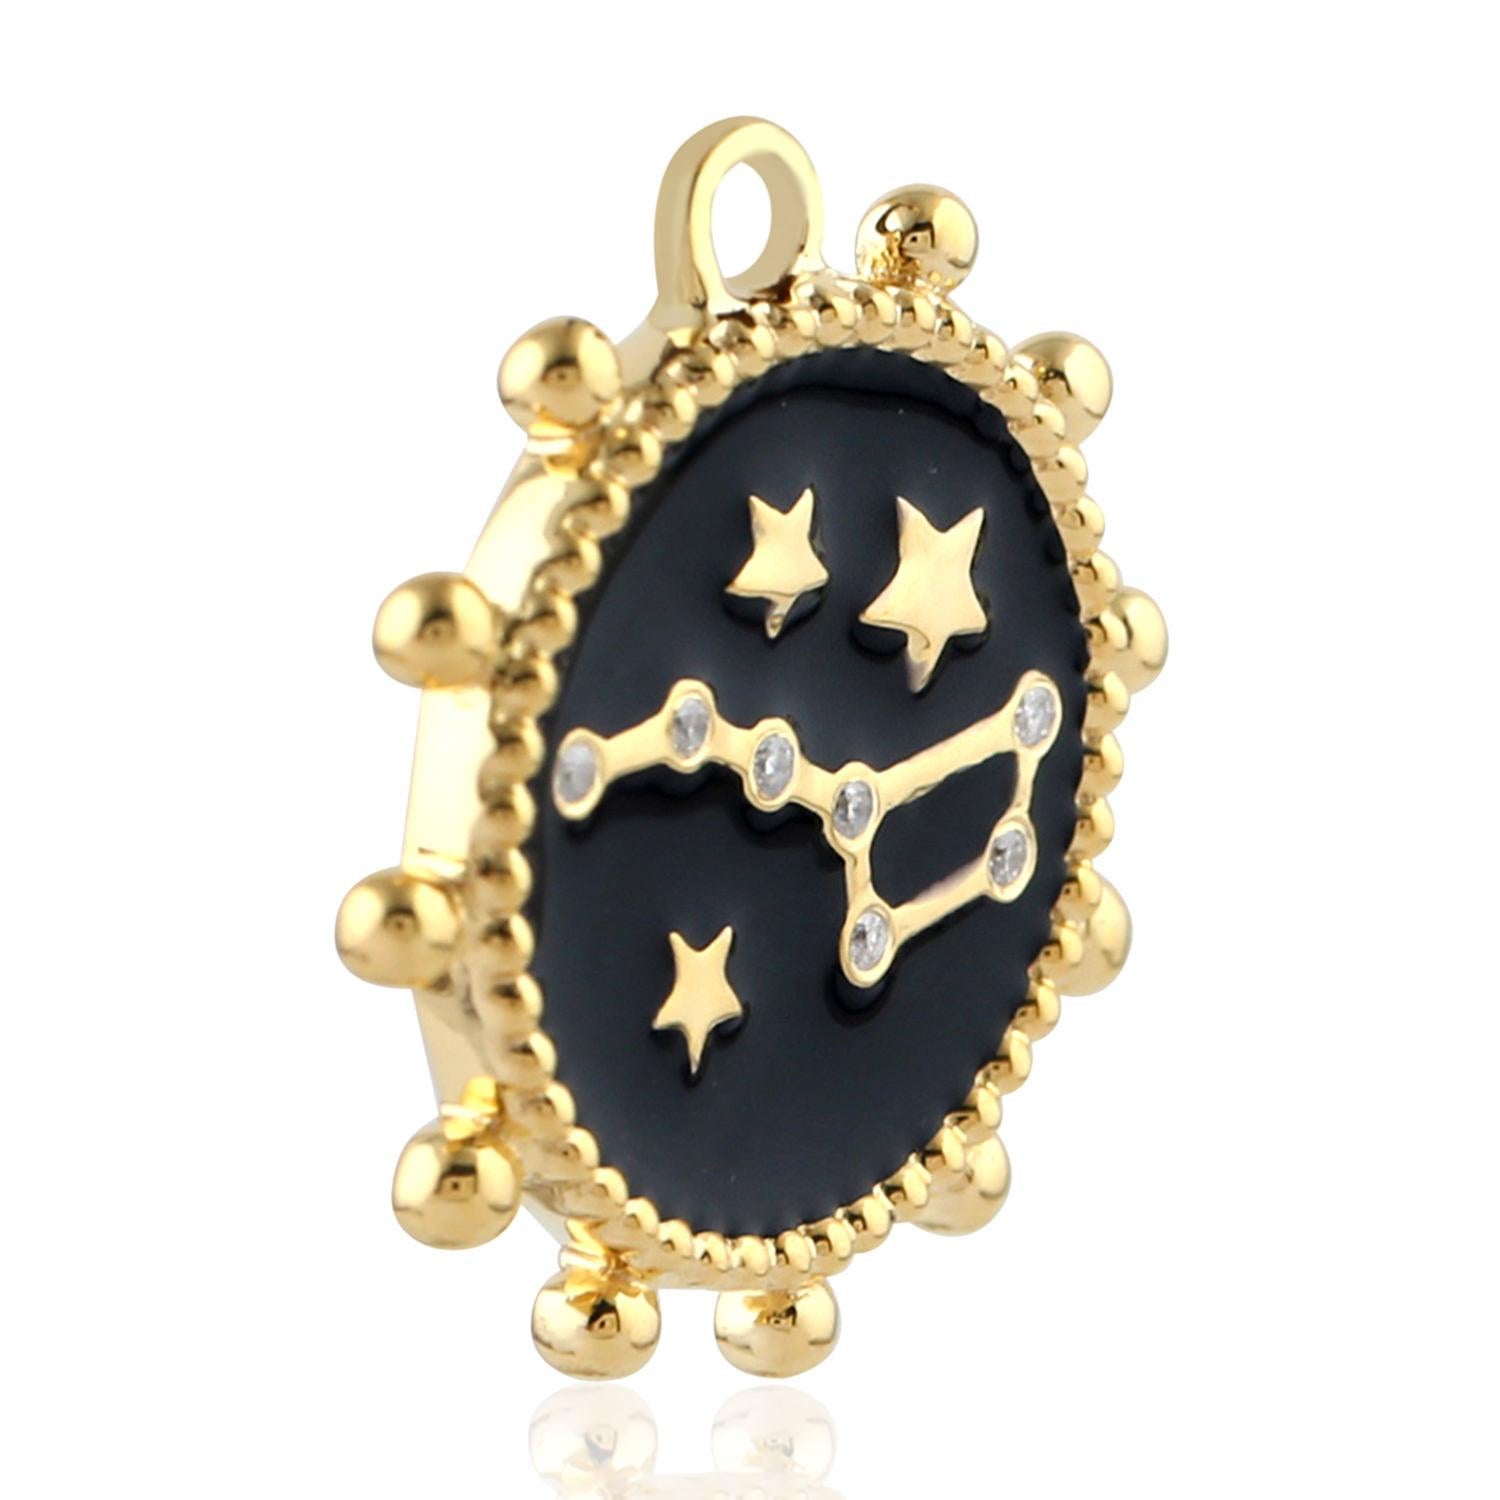 The 14 karat gold pendant medallion is set with black enamel and .03 carats of shimmering diamonds. 

FOLLOW  MEGHNA JEWELS storefront to view the latest collection & exclusive pieces.  Meghna Jewels is proudly rated as a Top Seller on 1stdibs with